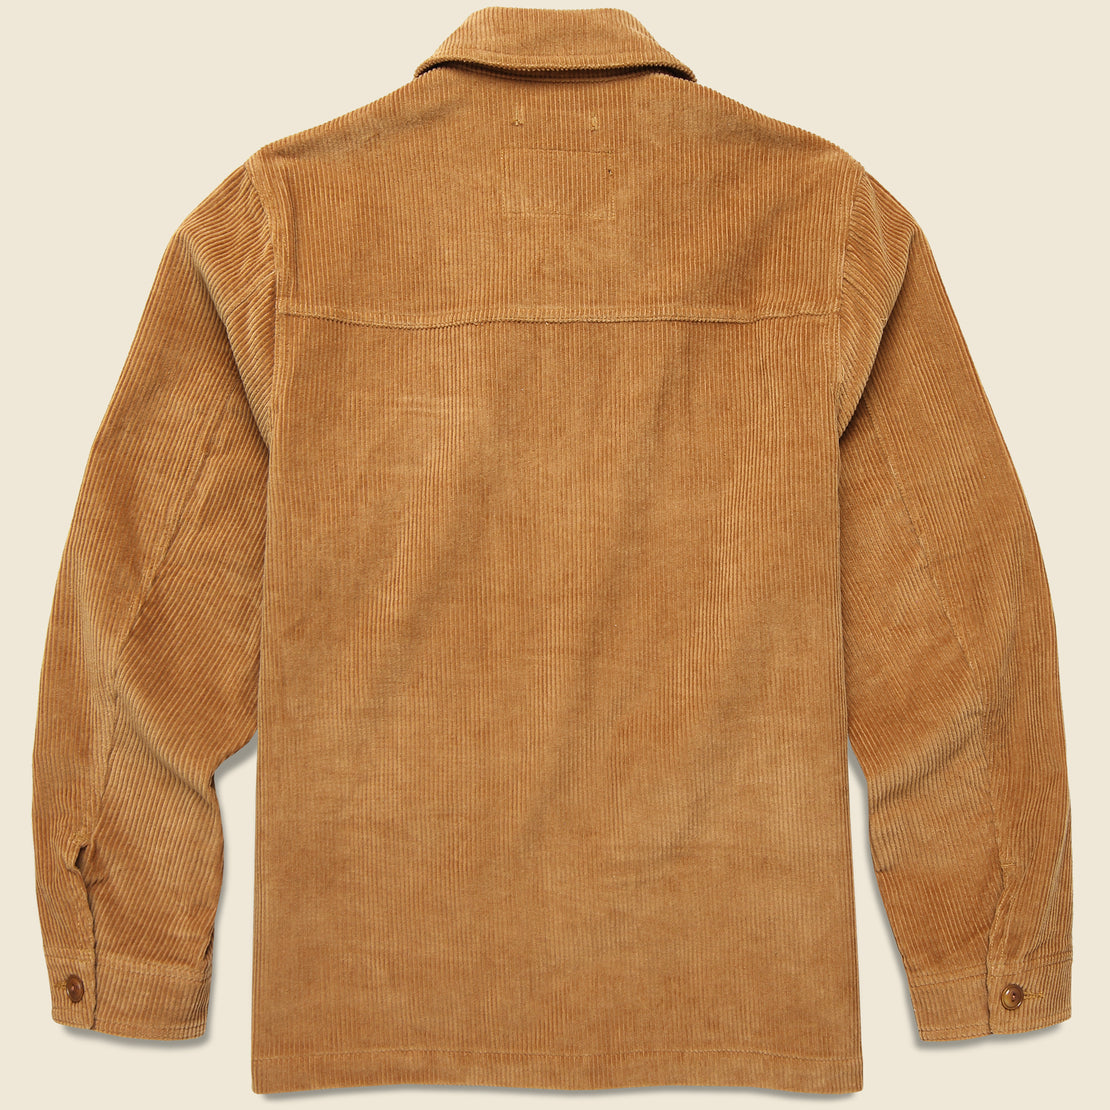 Wale Corduroy Chore Jacket - Tobacco - Schott - STAG Provisions - Outerwear - Shirt Jacket